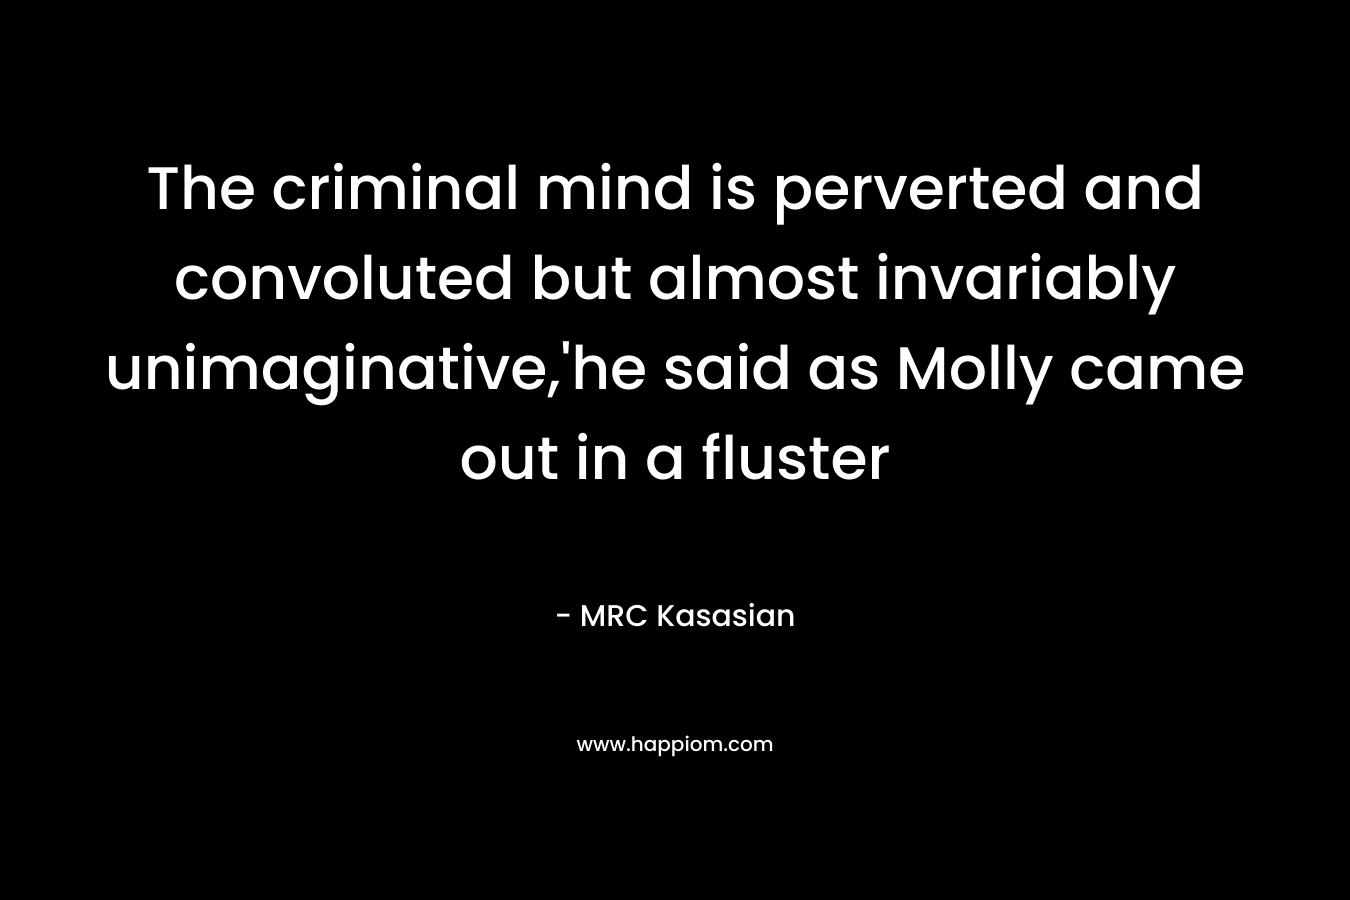 The criminal mind is perverted and convoluted but almost invariably unimaginative,’he said as Molly came out in a fluster – MRC Kasasian